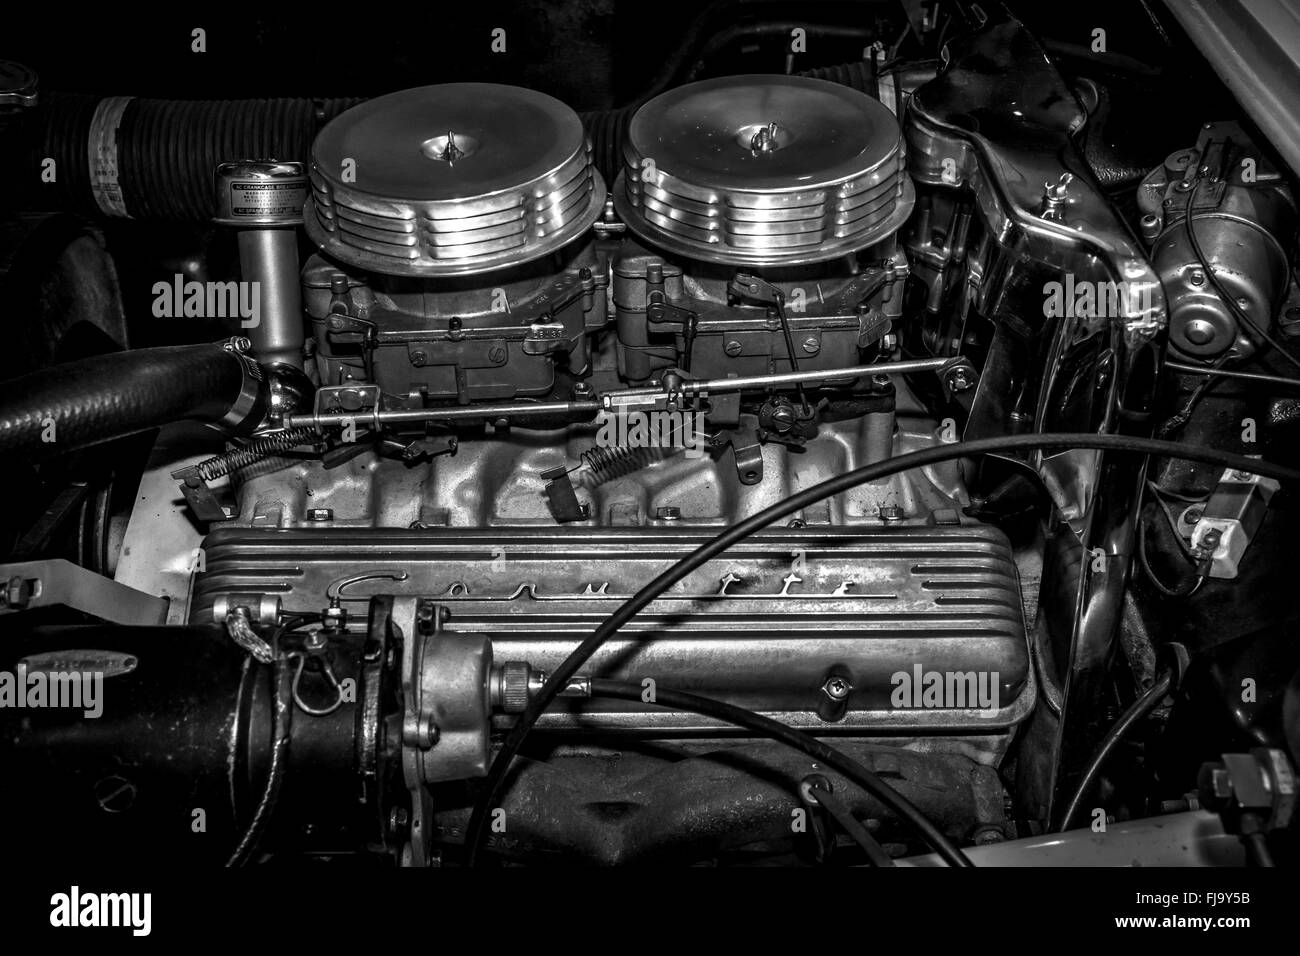 The 283 cubic-inch V8 in the 'Cheaterville' of sports car Chevrolet Corvette, 1957. Black and white. Stock Photo